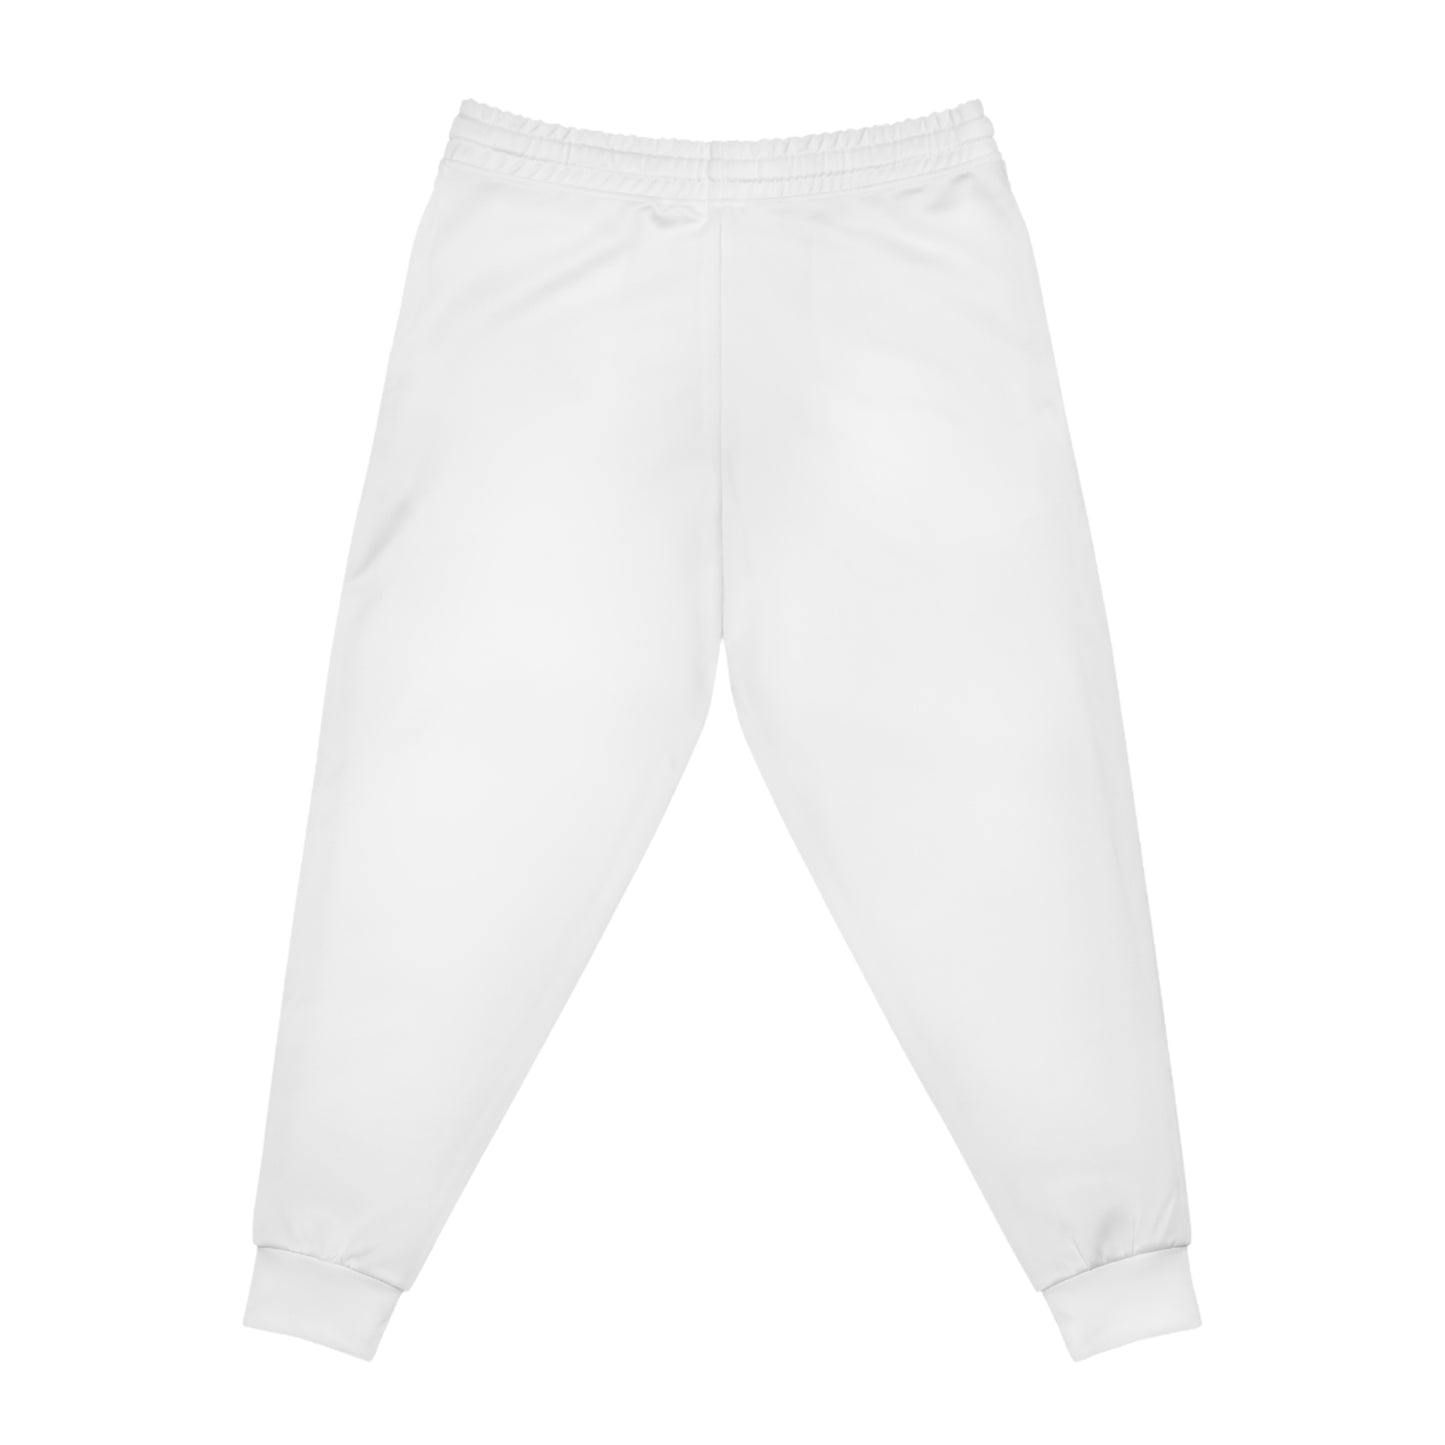 EnerBullgetic Striped White Edition Athletic Joggers